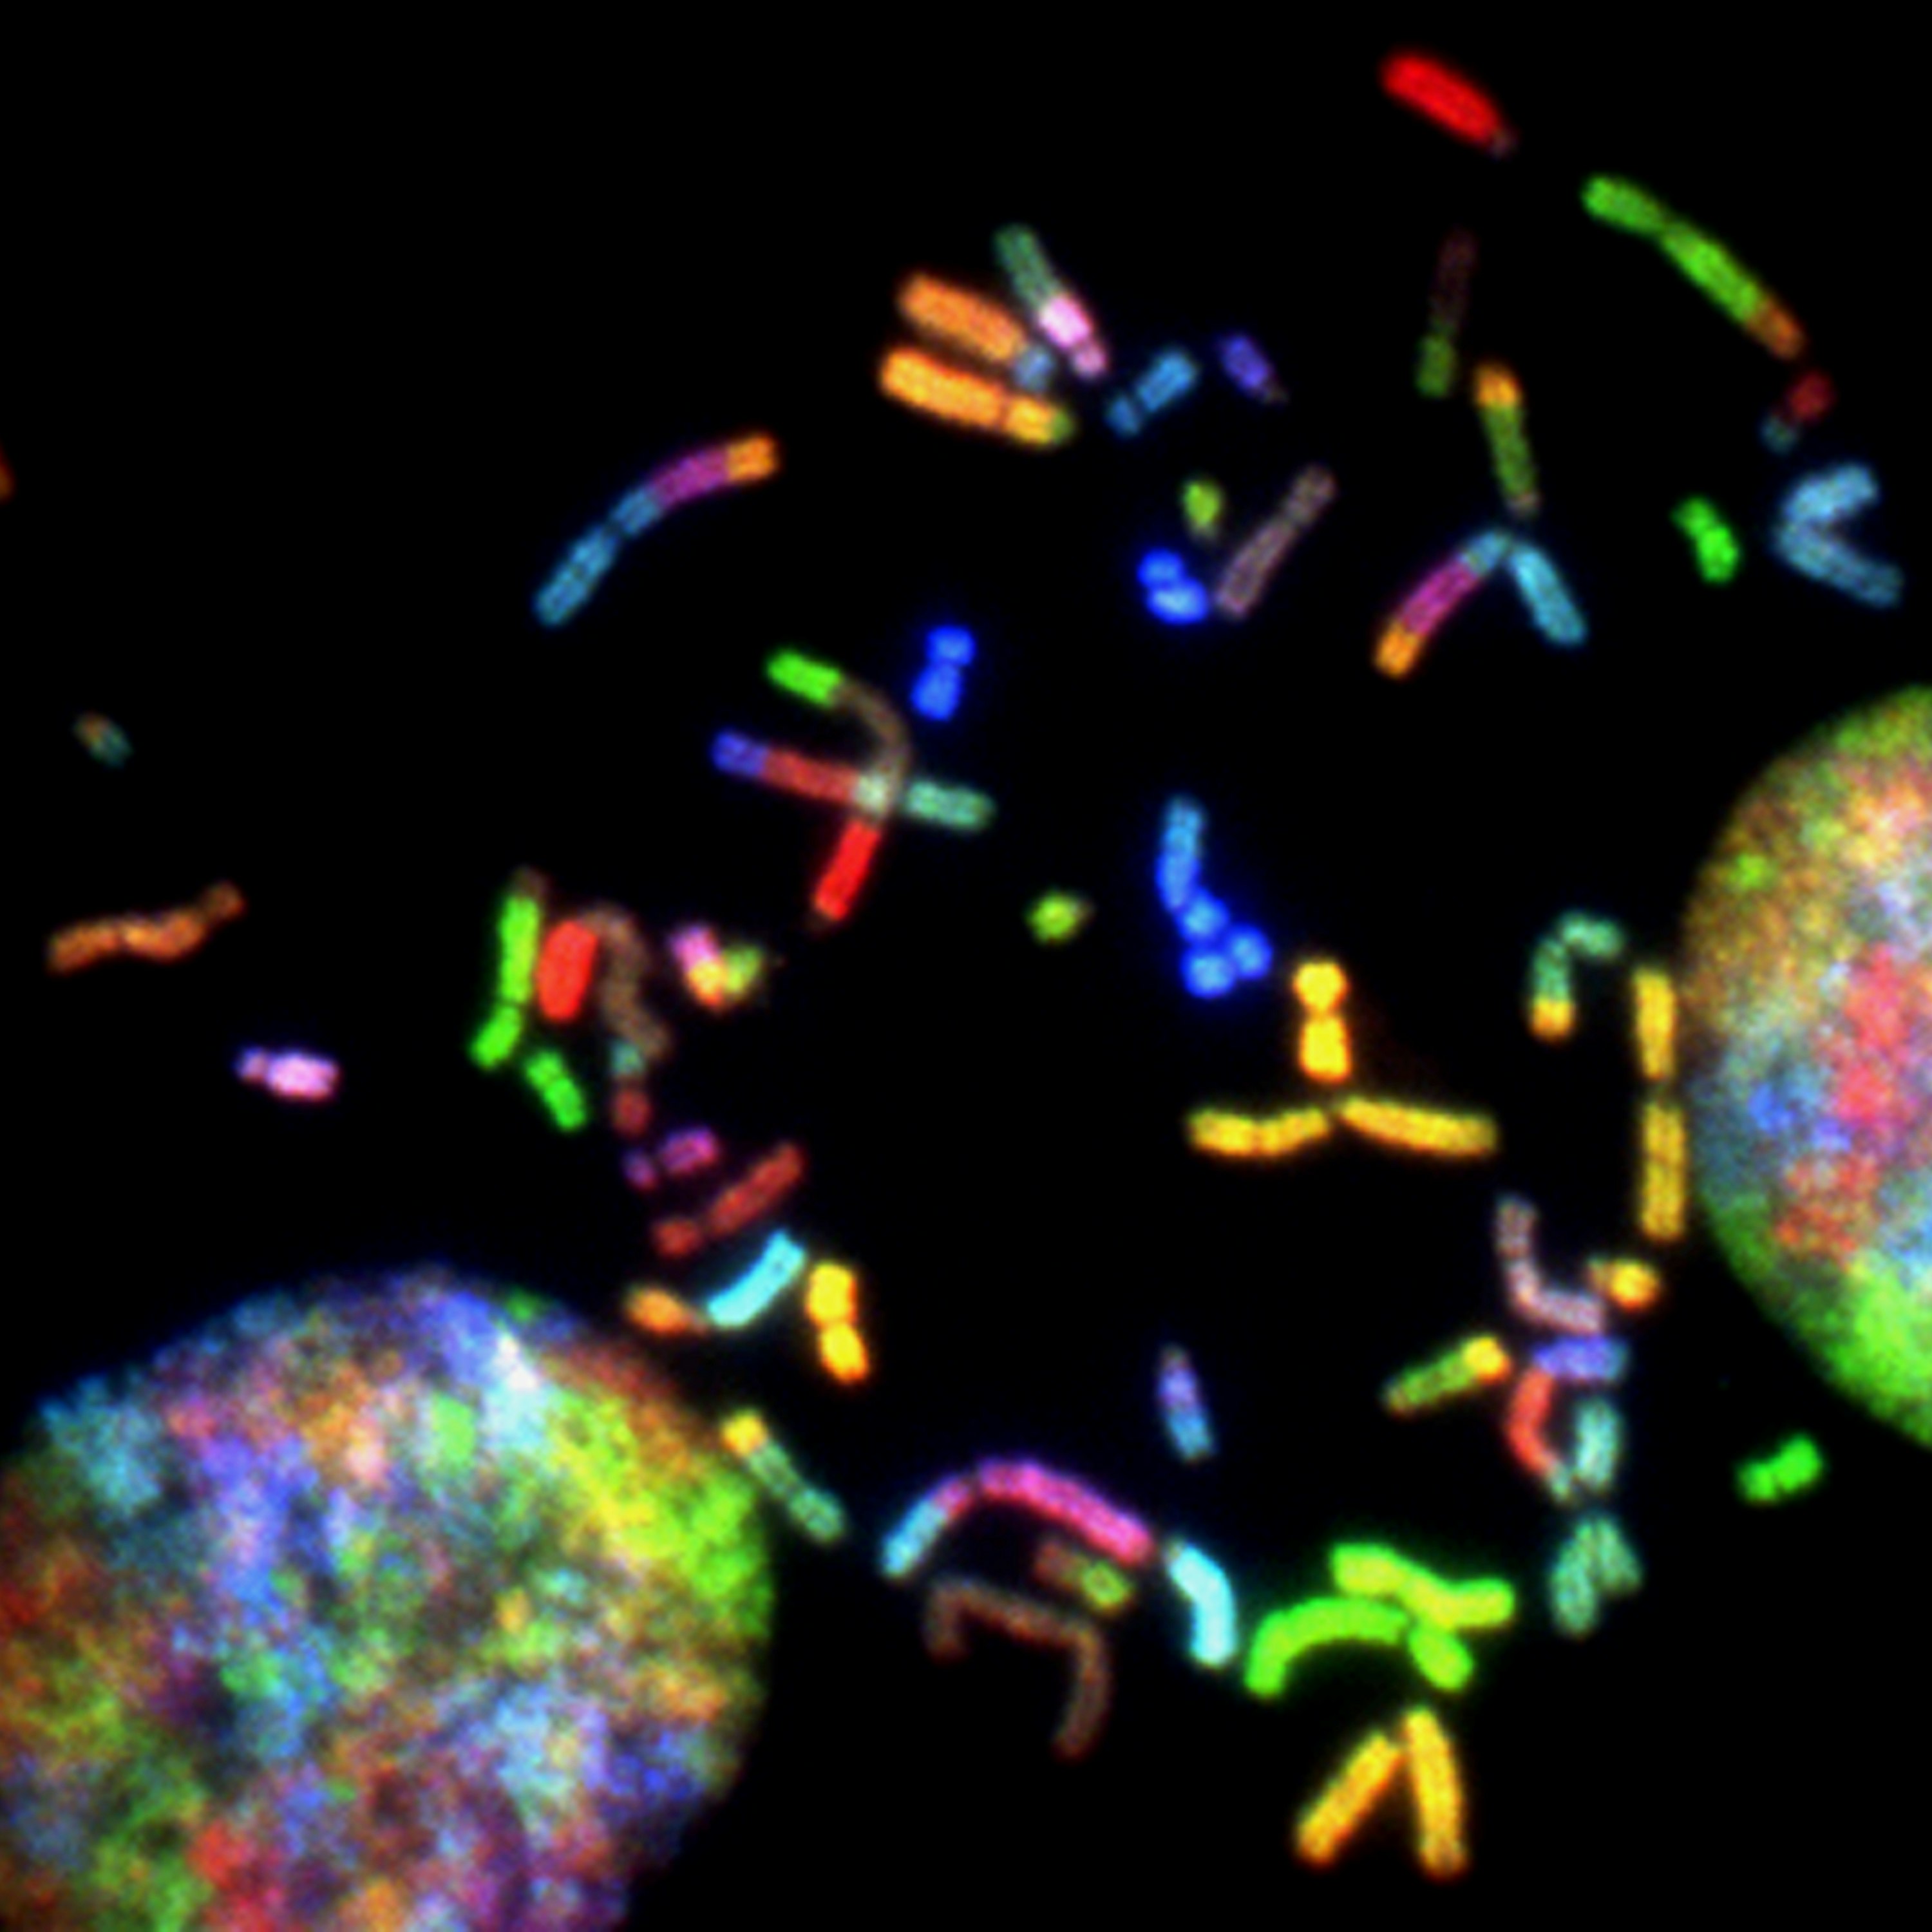 Brain Cancer Chromosomes. Chromosomes prepared from a malignant glioblastoma visualized by spectral karyotyping (SKY) reveal an enormous degree of chromosomal instability -- a hallmark of cancer. Created by Thomas Ried, 2014